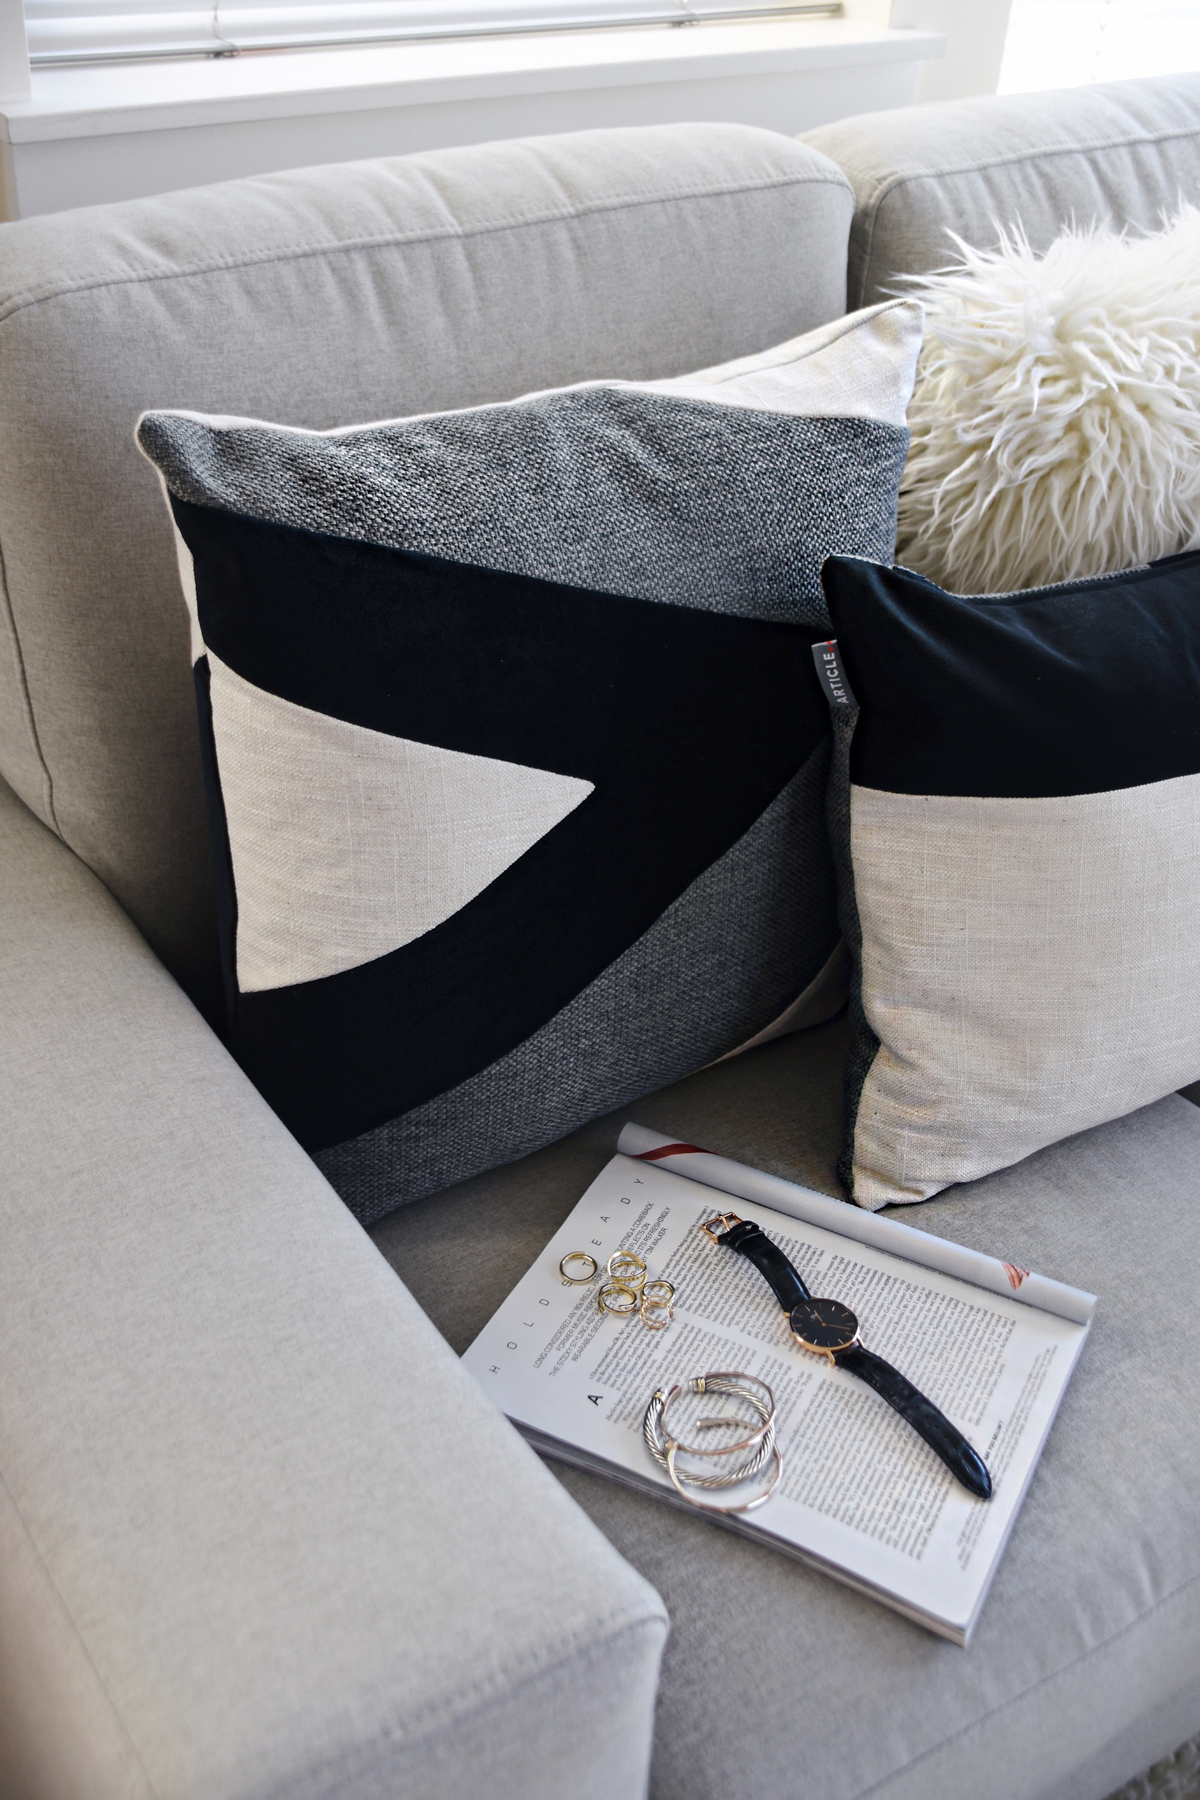 Article Velu pillow collection - CONTEMPORARY HOME DECOR WITH ARTICLE by popular Denver fashion blogger Chic Talk